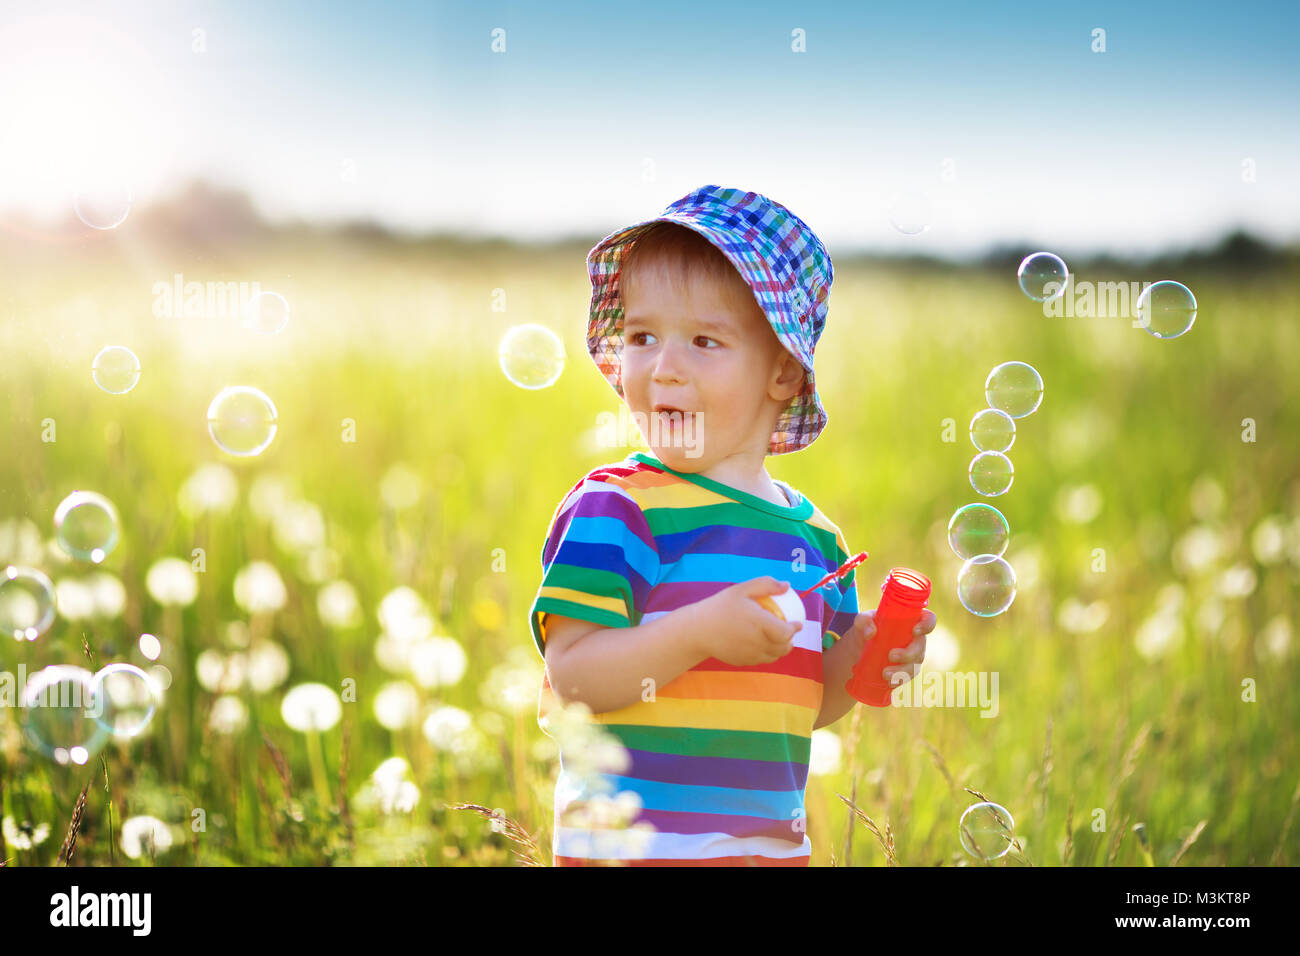 Baby boy standing in grass on the fieald with dandelions Stock Photo